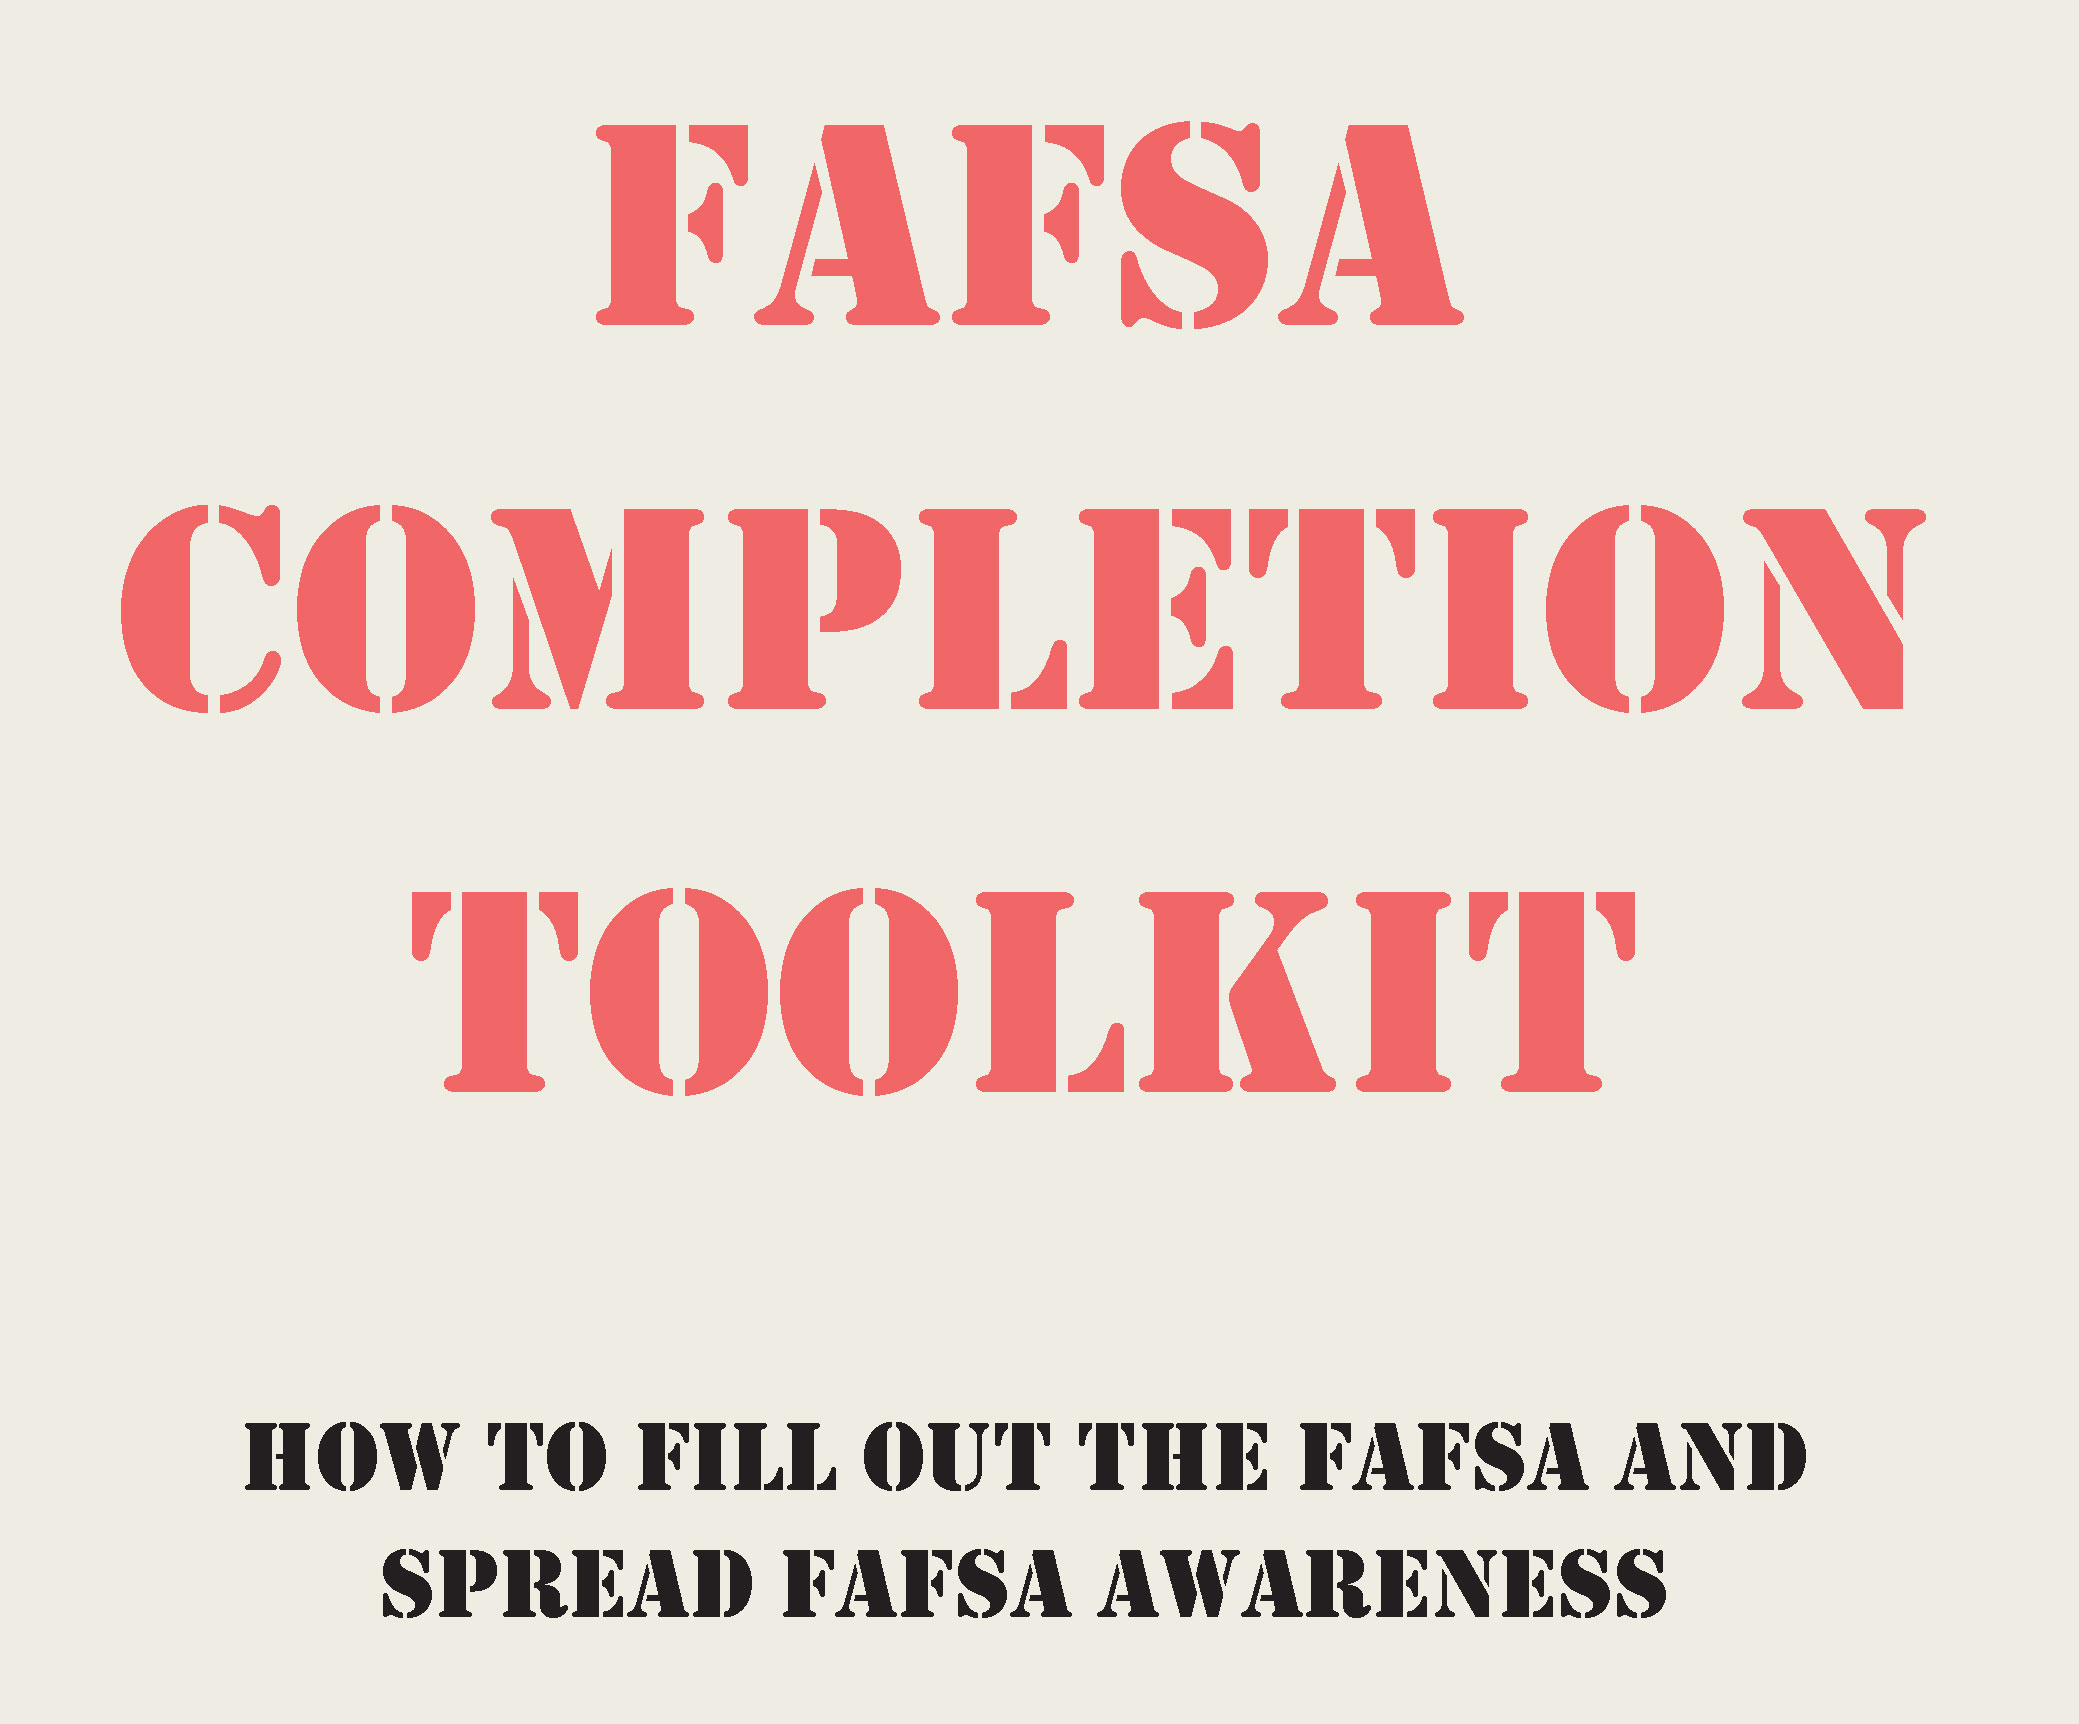 FAFSA-Toolkit-front-page